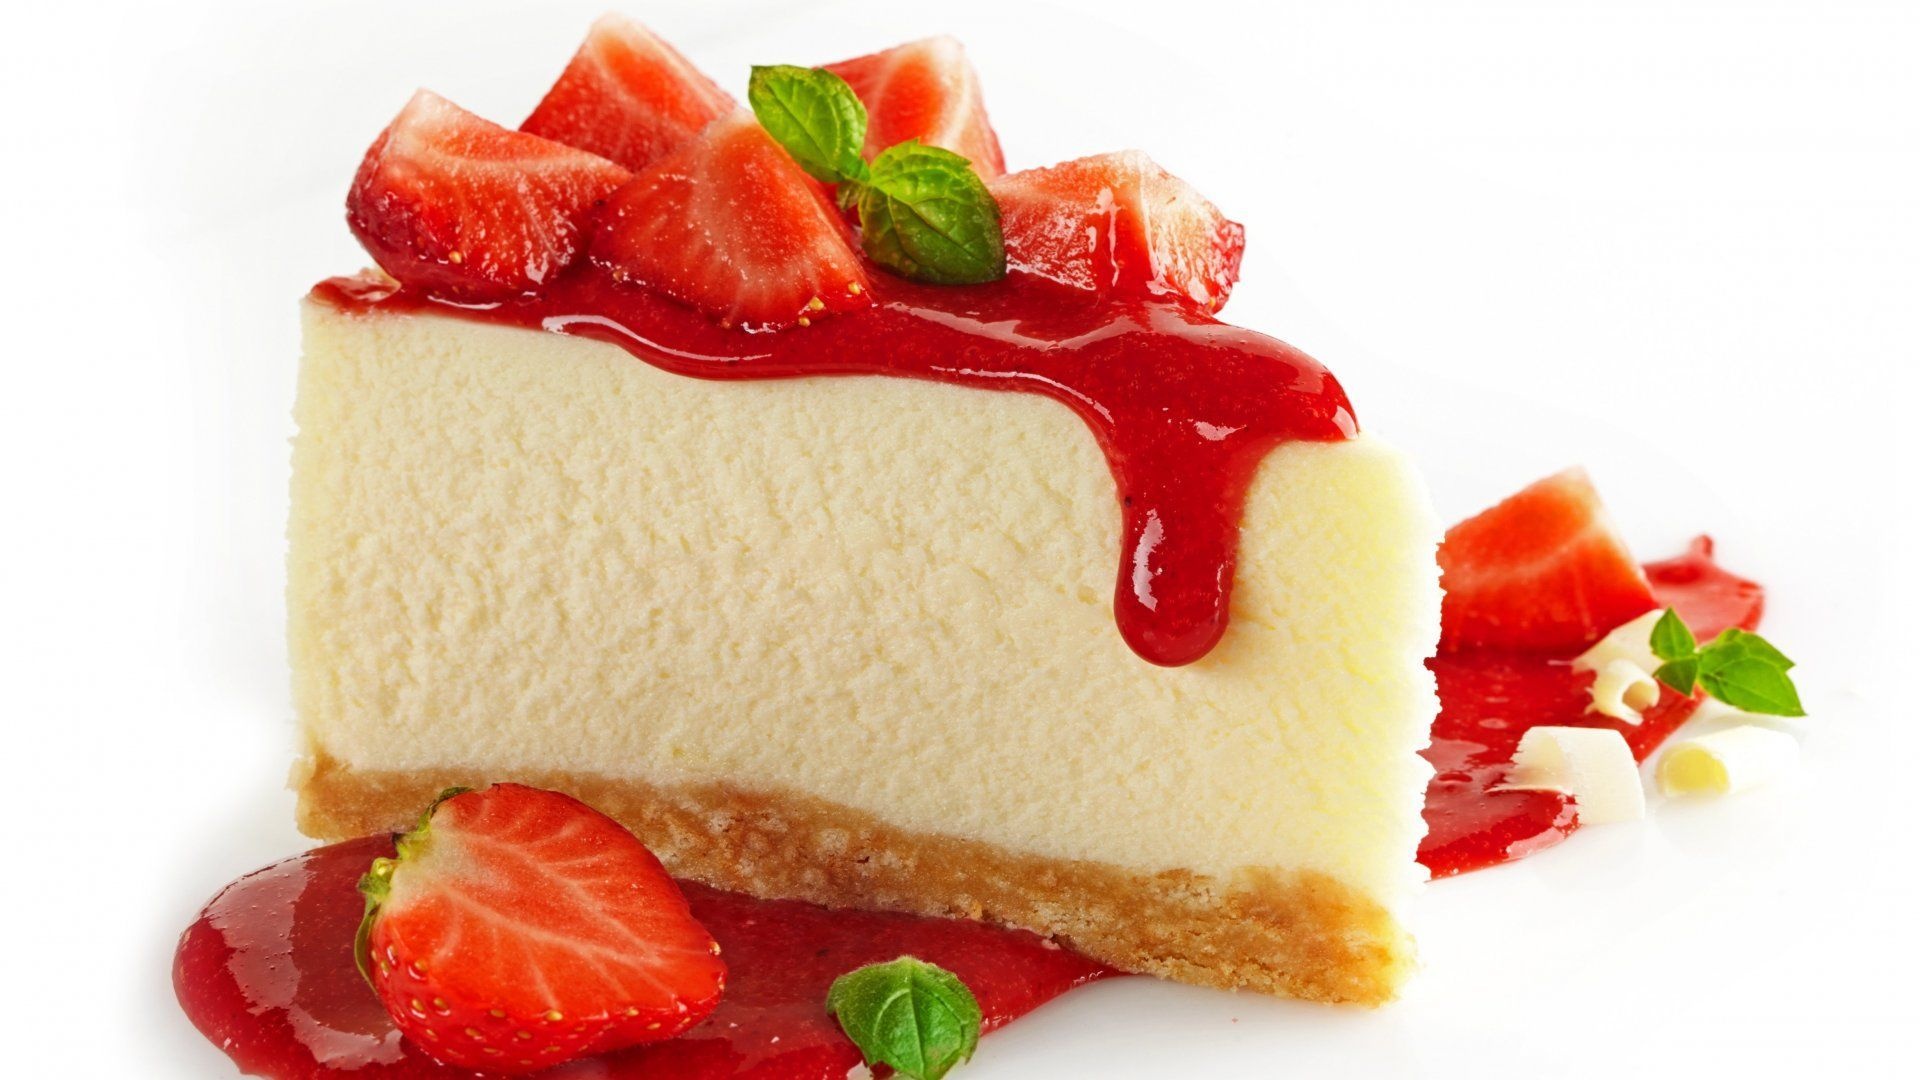 Cheesecake: Typically made with a cheese like ricotta, cream cheese, or Neufchatel. 1920x1080 Full HD Background.